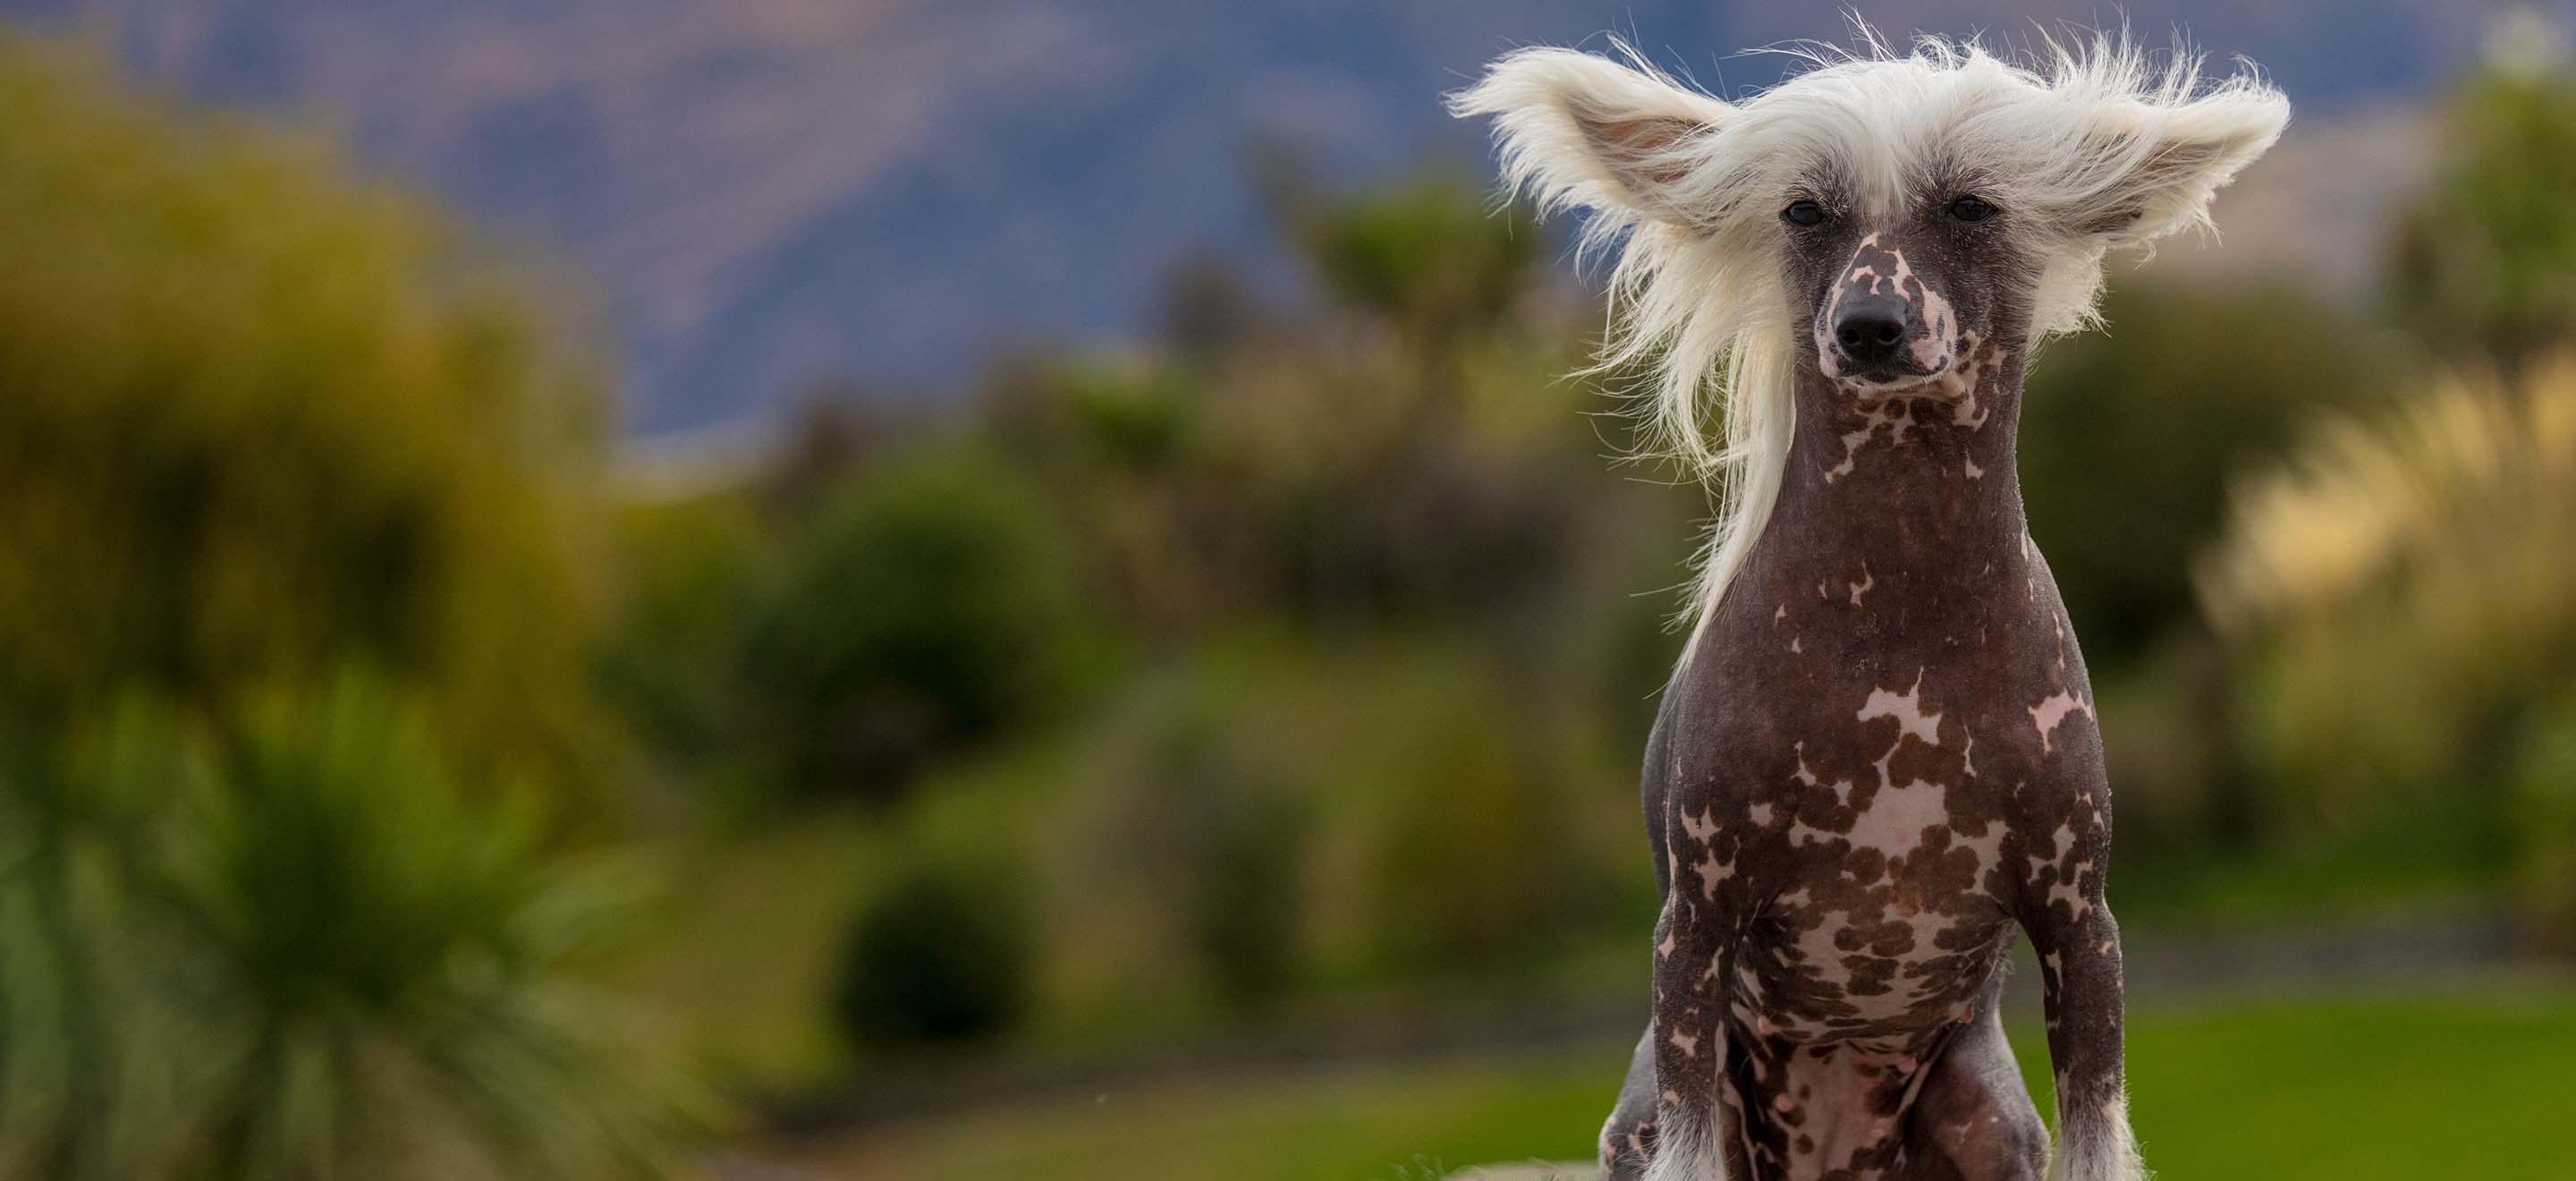 A spotted Chinese Crested dog standing in front of mountains scenery image